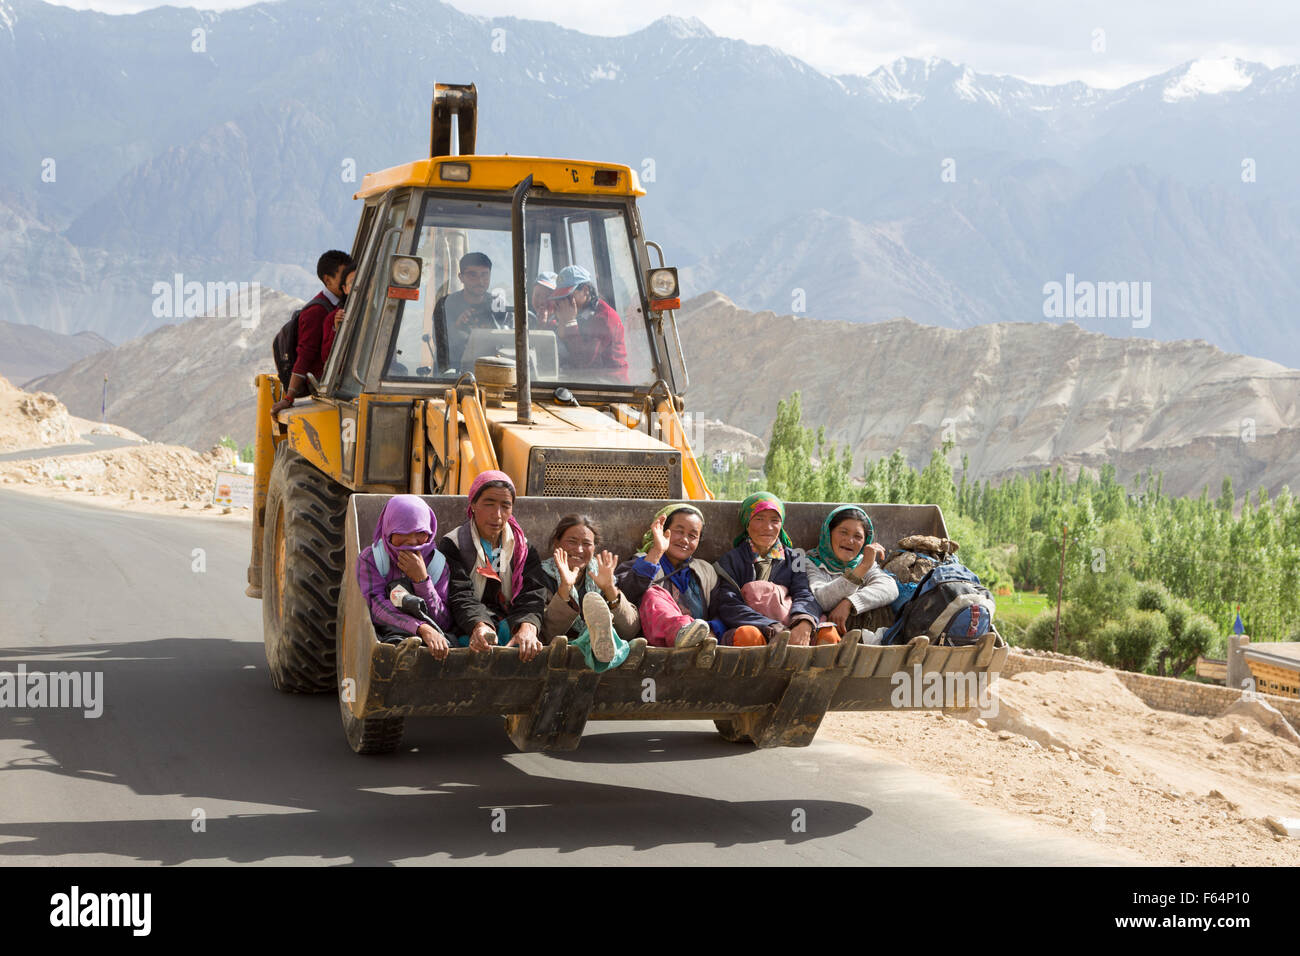 Leh, India - July 19 2014: Senior women using an earth moving machine as transport on the road in Ladakh, part of India Jammu & Stock Photo